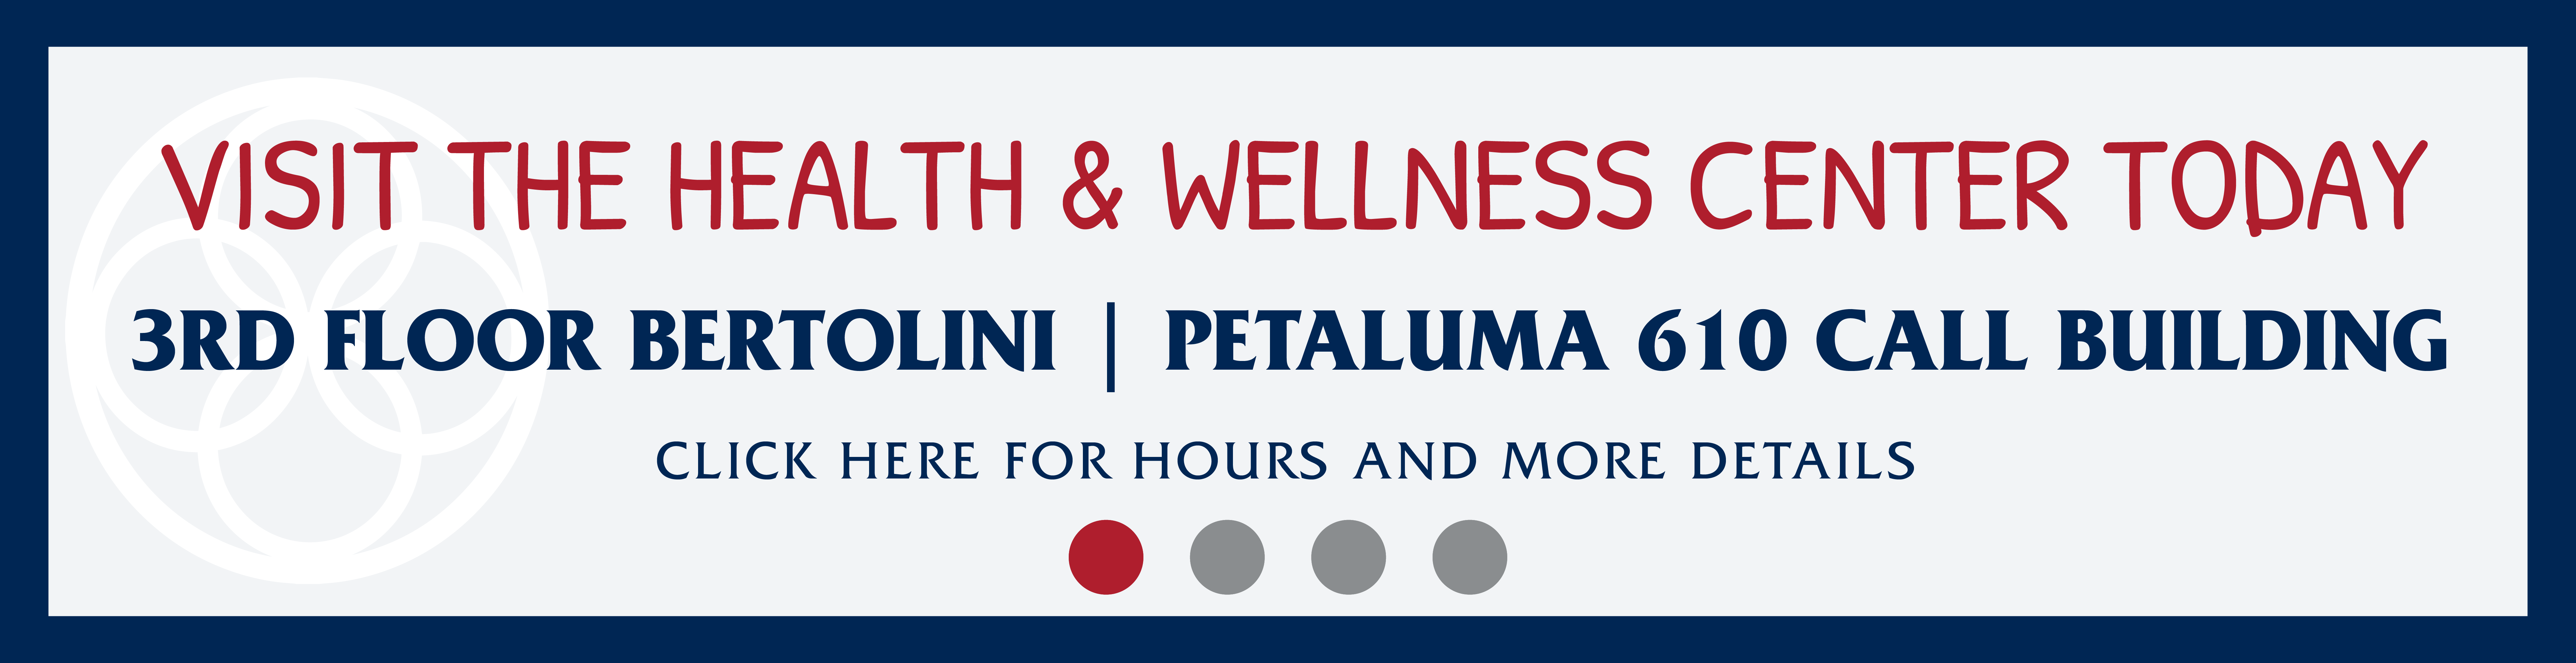 Visit the Health & Wellness Center Today!